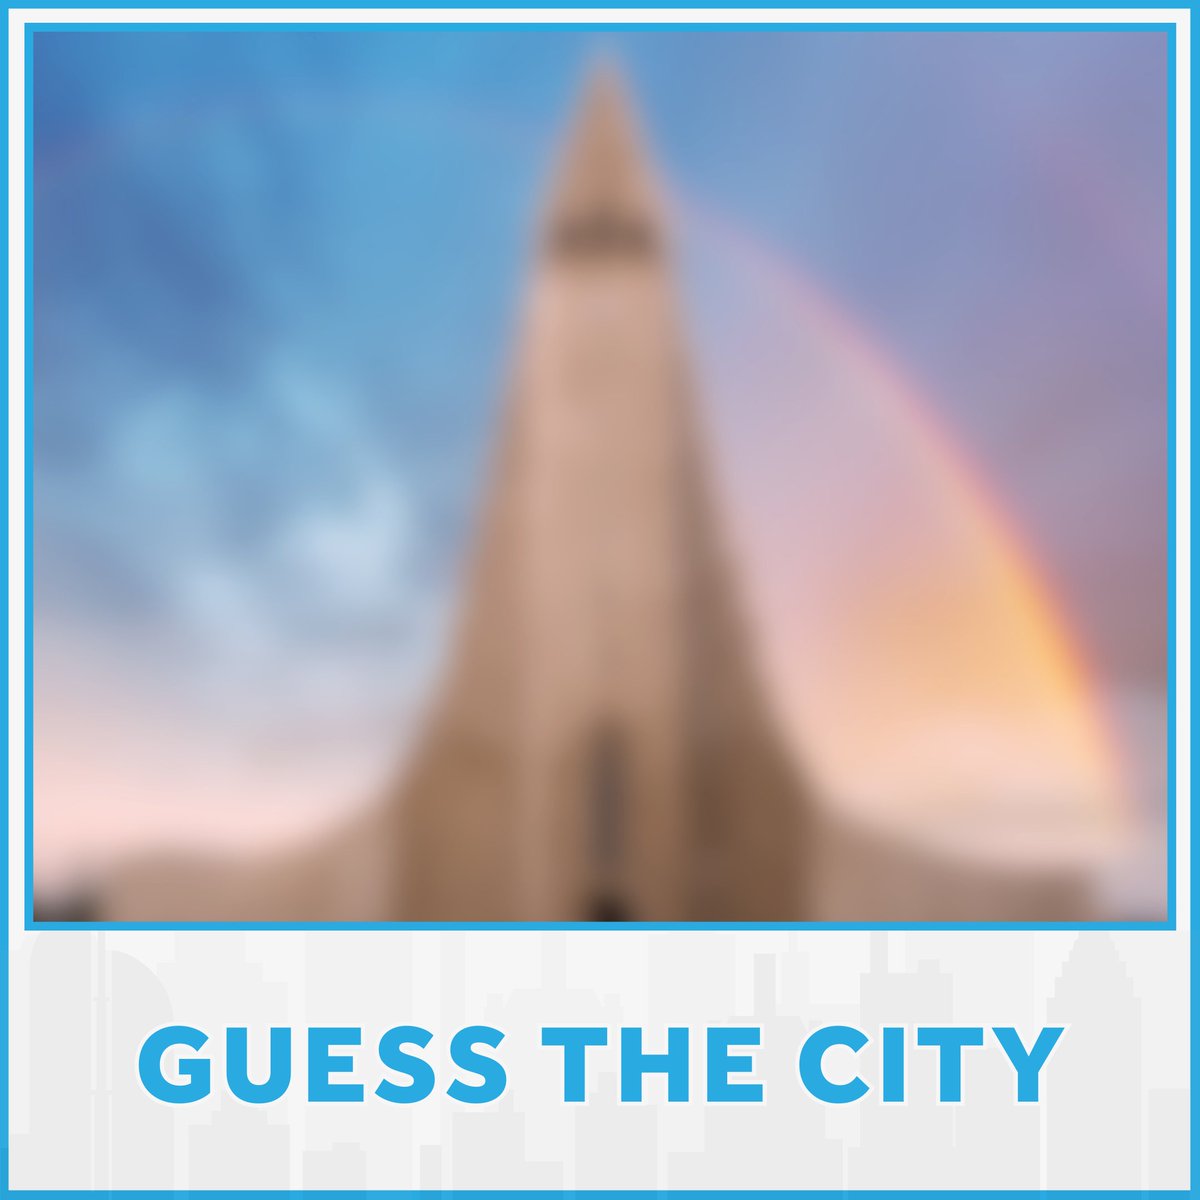 Sunday quiz returns with a new lick of paint 🖌️

Can you guess the city this week? Grab a brew, sit back, relax and submit your guess in the comments! ☕

#SendMyBag #SundayQuiz #GuessTheCity #SundayFunday #WeekendVibes #CityTrivia #CommentBelow